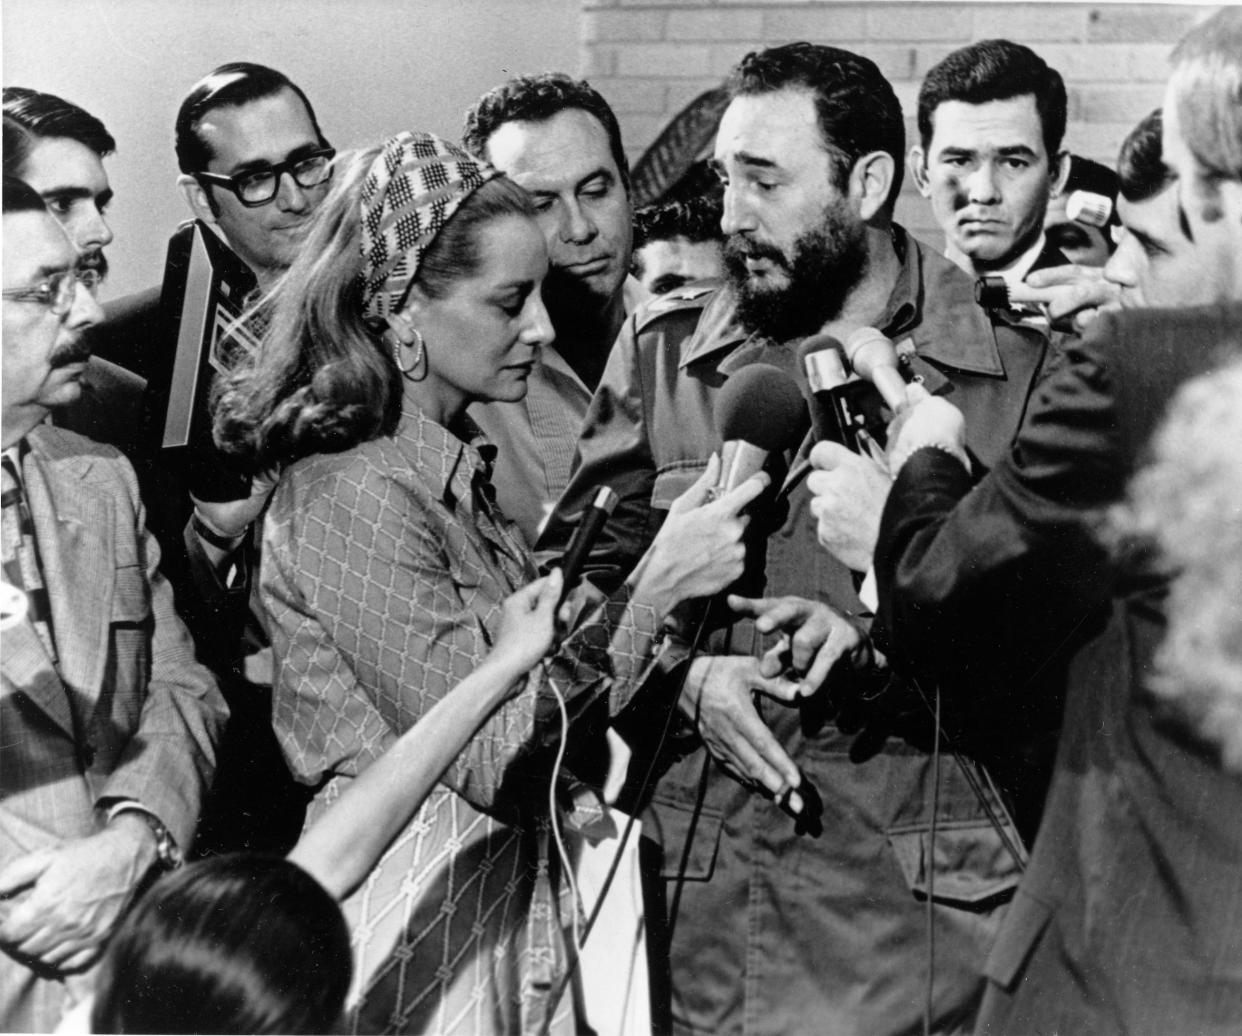 Barbara Walters poses a question to Cuban Prime Minister Fidel Castro at a news conference in Havana in 1975.